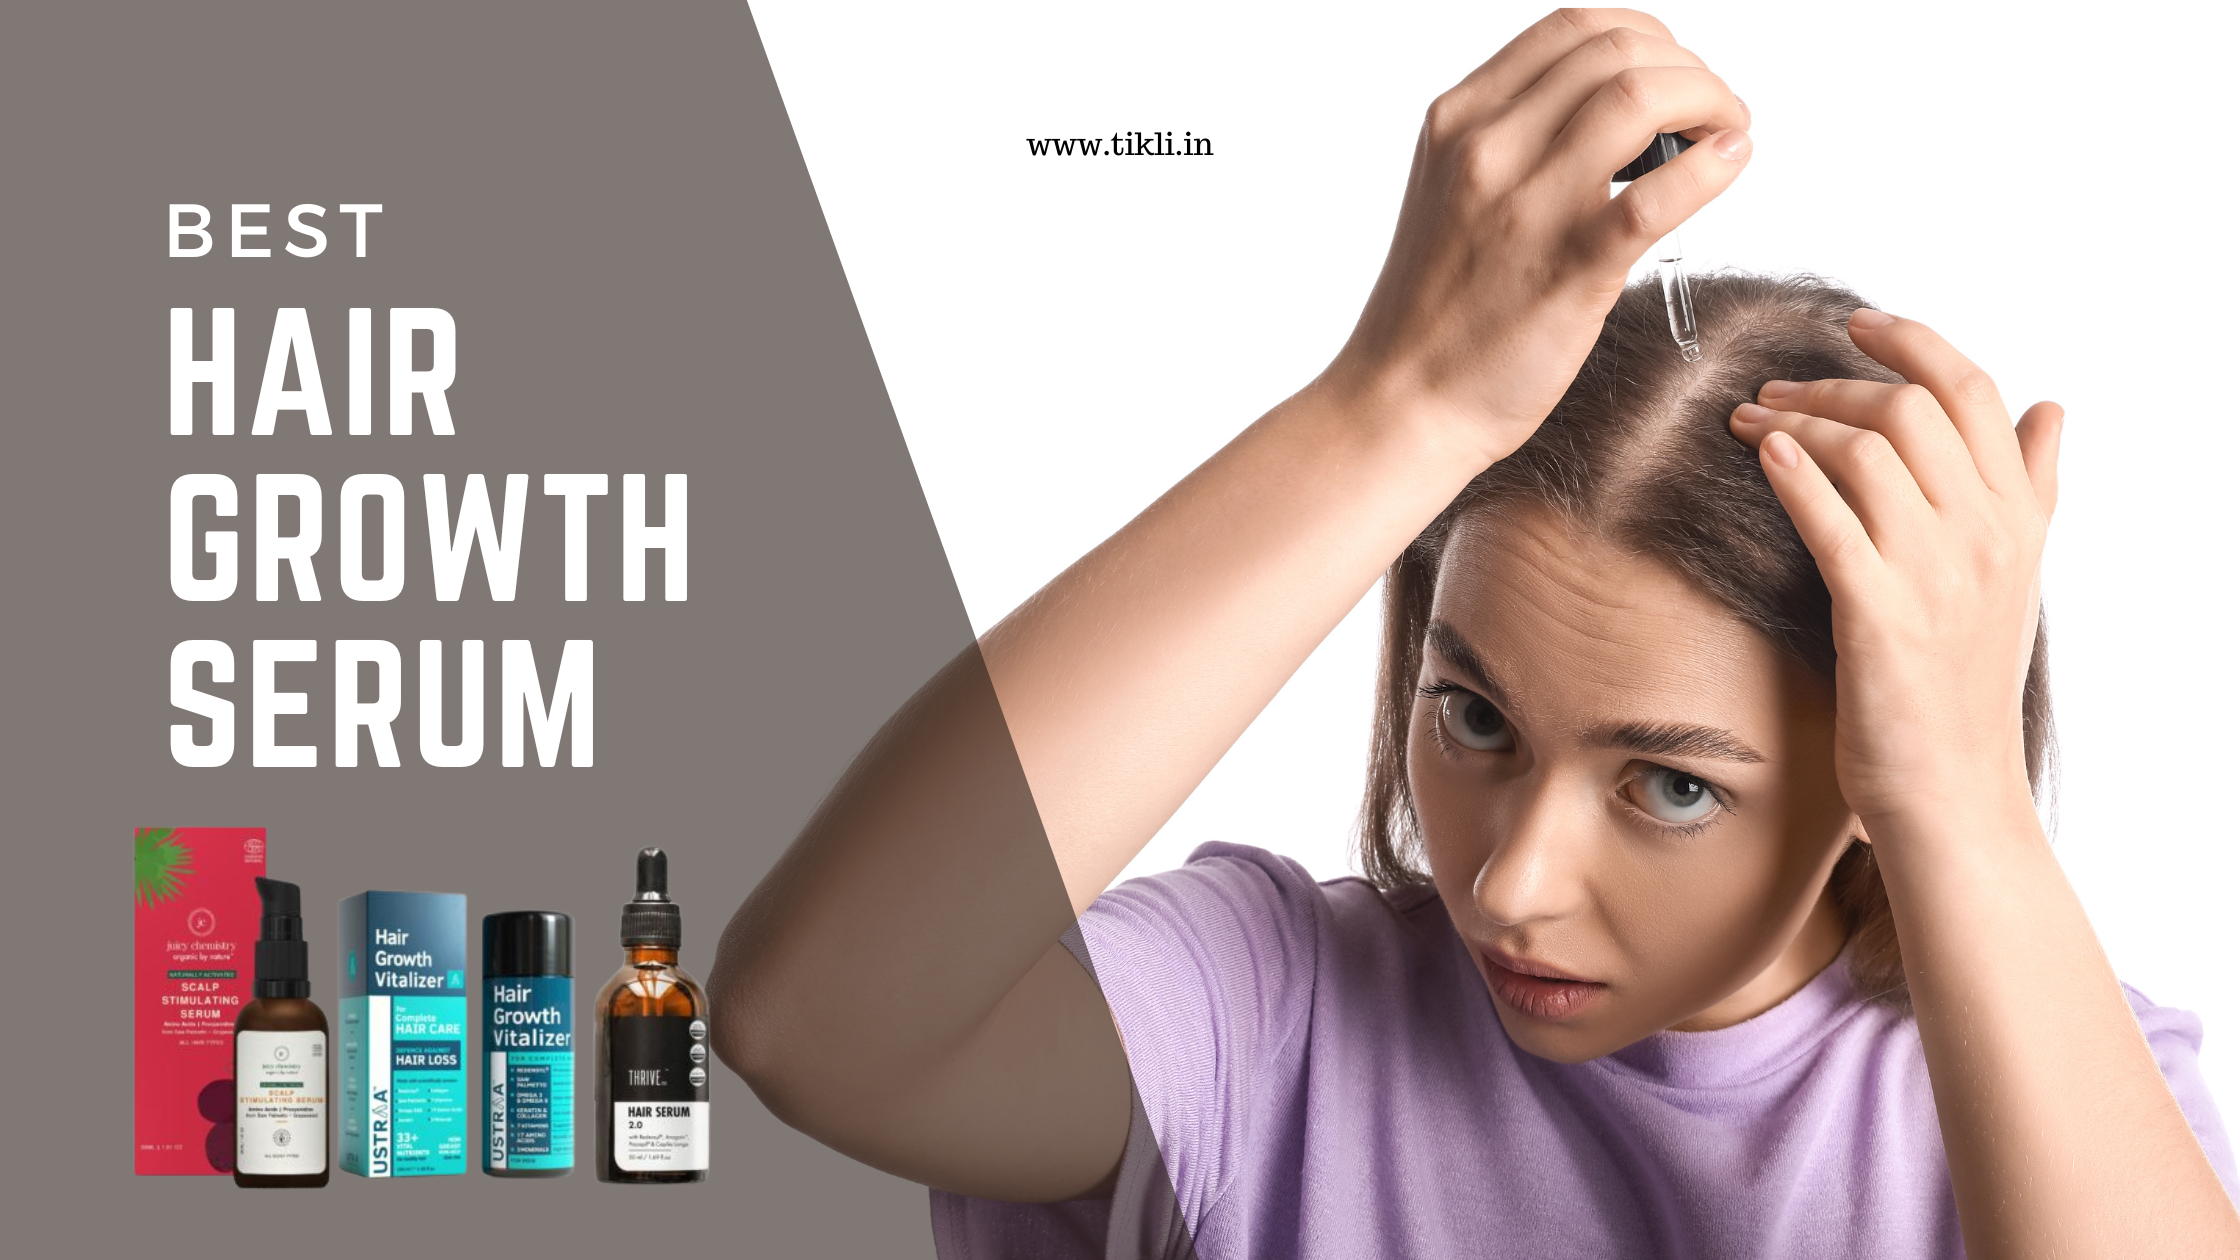 10 Best Hair Growth Serum For Men and Women In India - Tikli